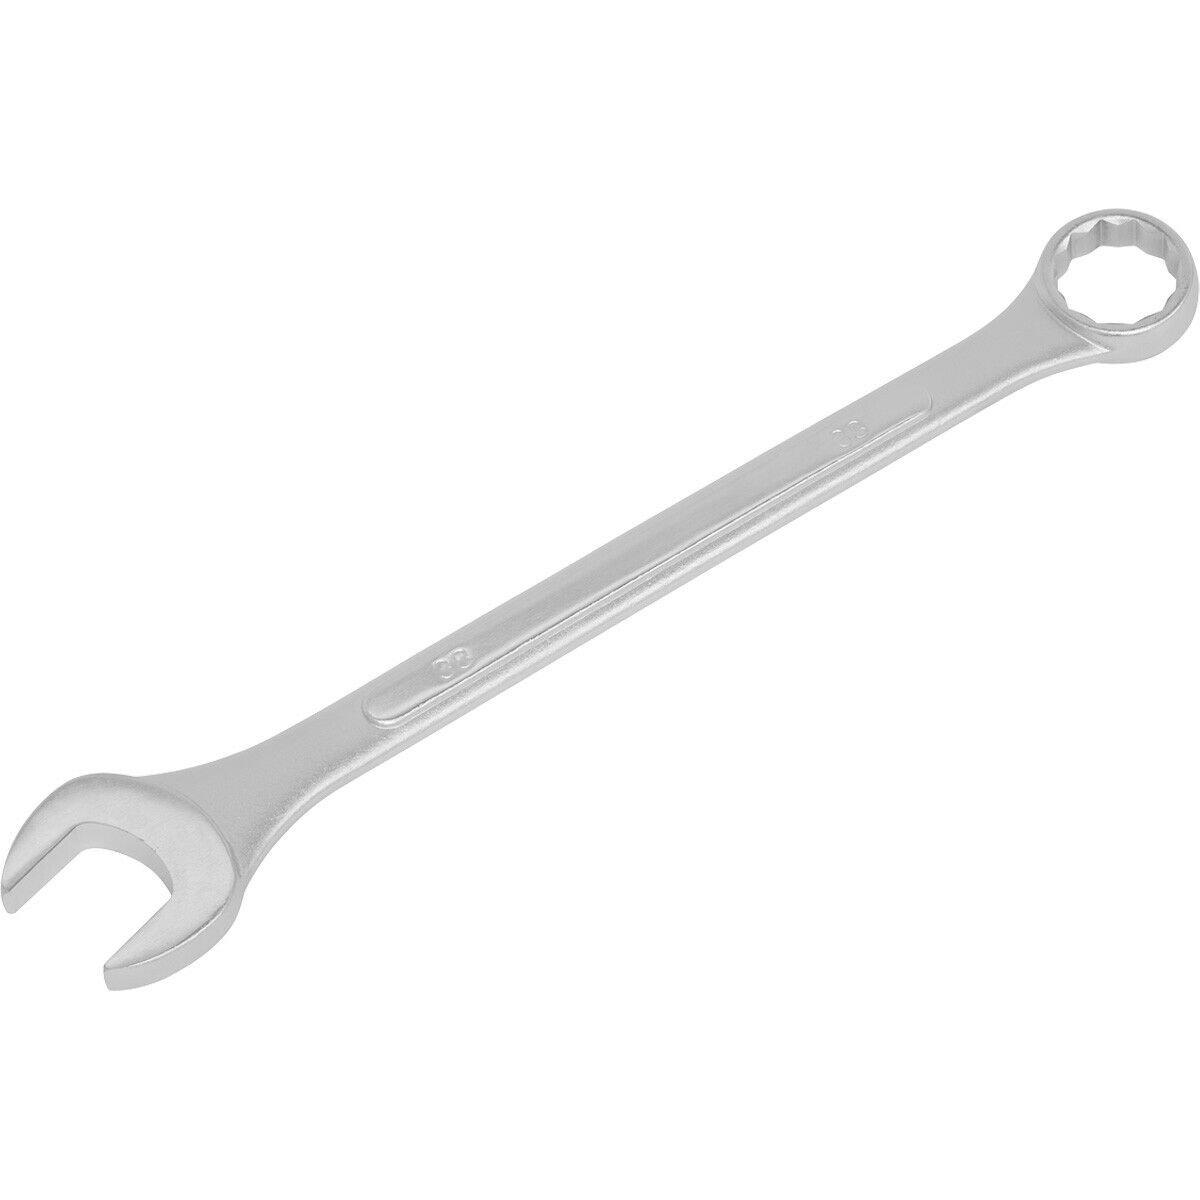 38mm Large Combination Spanner - Drop Forged Steel - Chrome Plated Polished Jaws